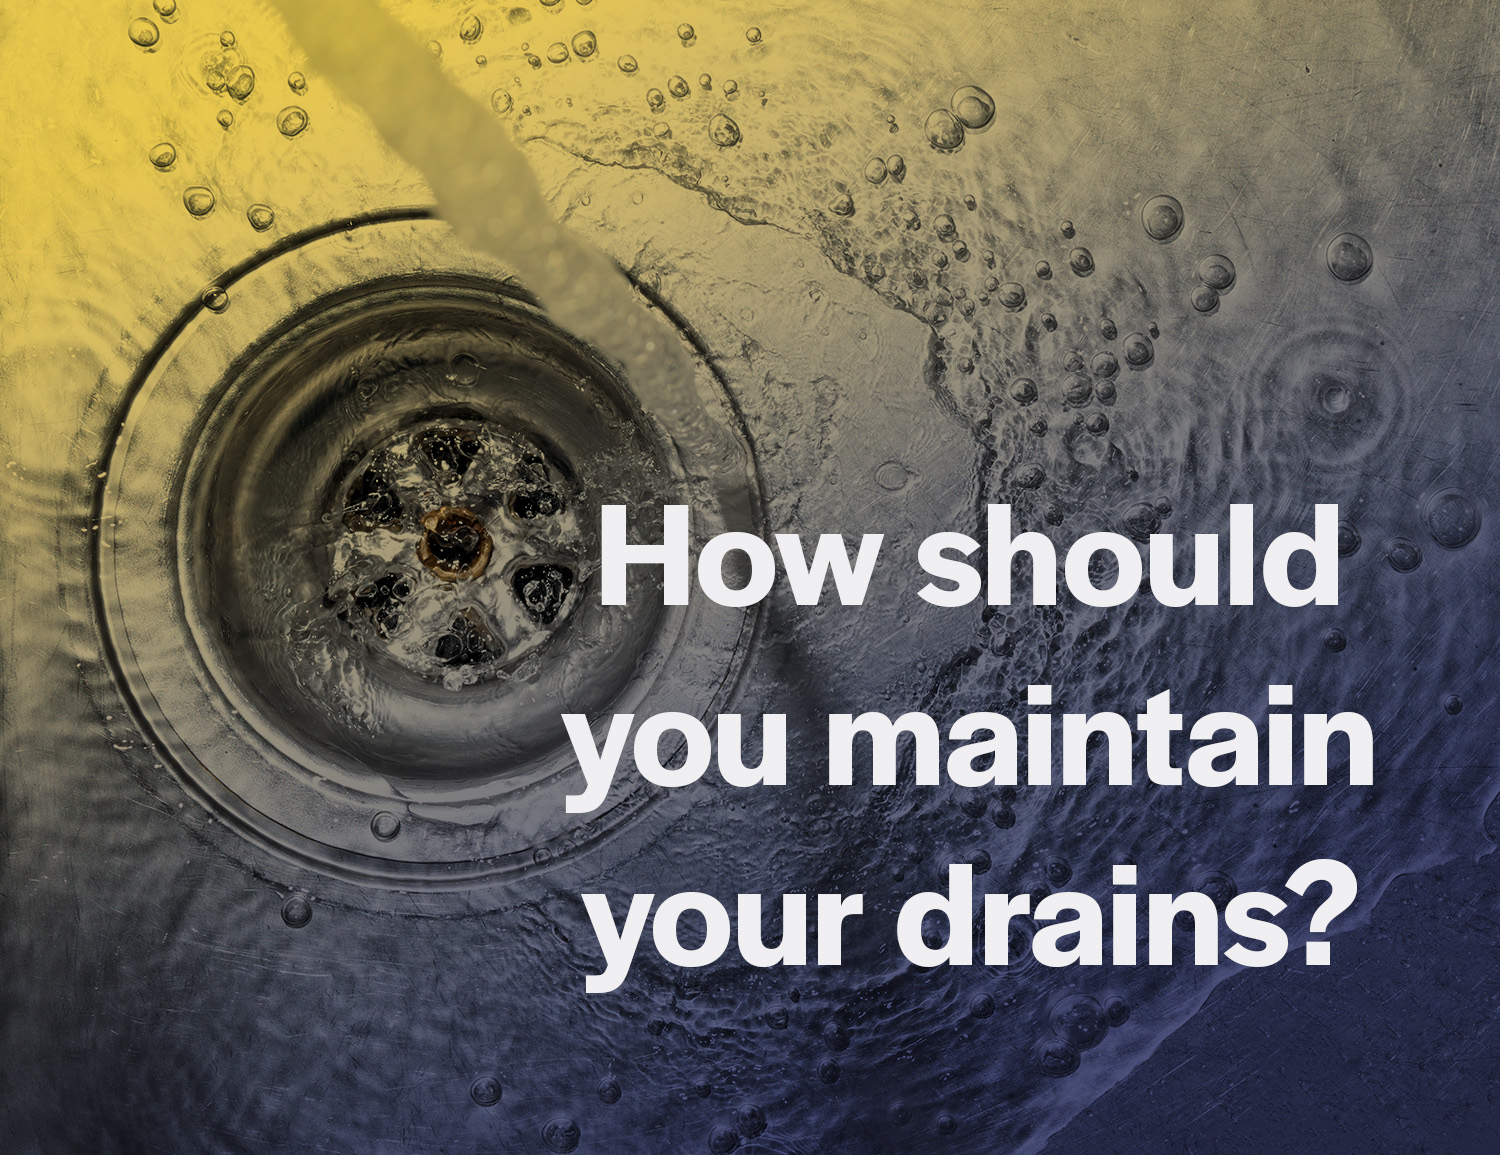 How should you maintain your drains